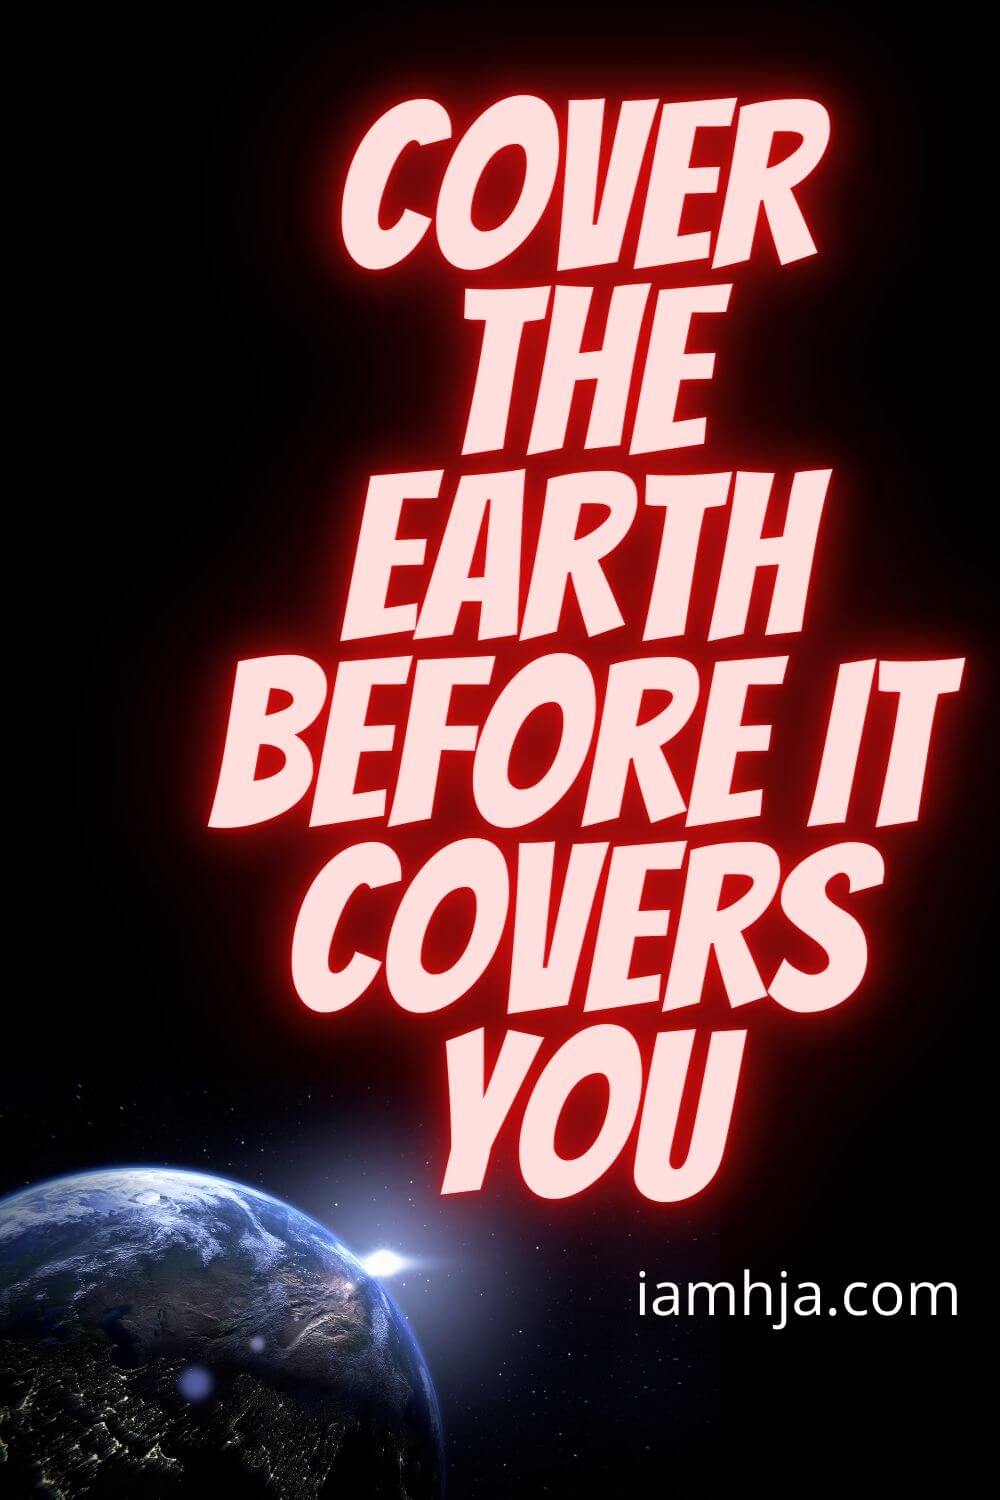 Cover the earth before it covers you